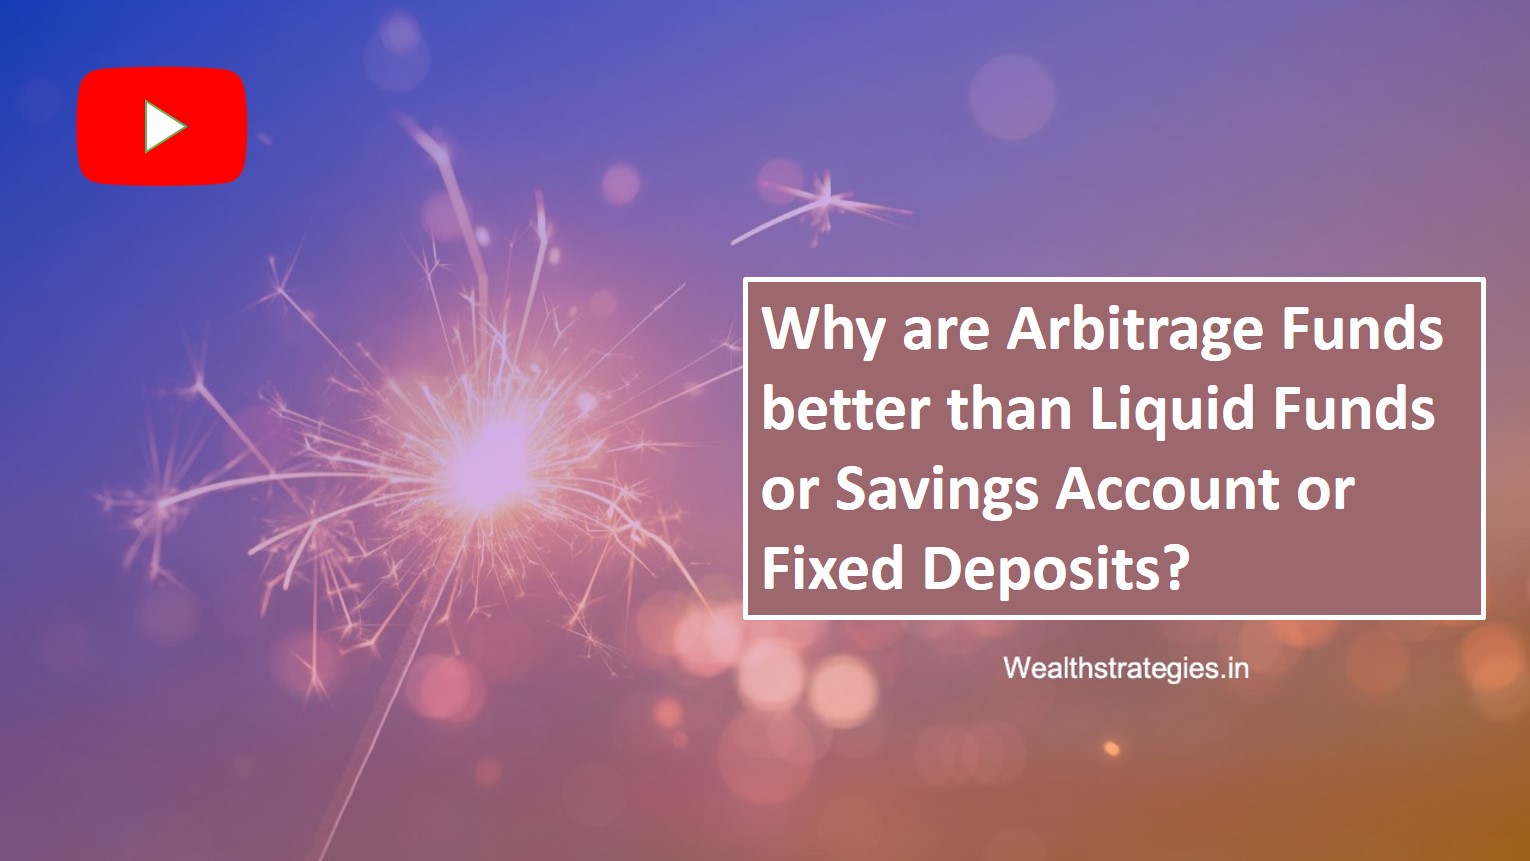 Why are Arbitrage Funds better than Liquid Funds or Savings Account or Fixed Deposits? (Duration: 4 min)